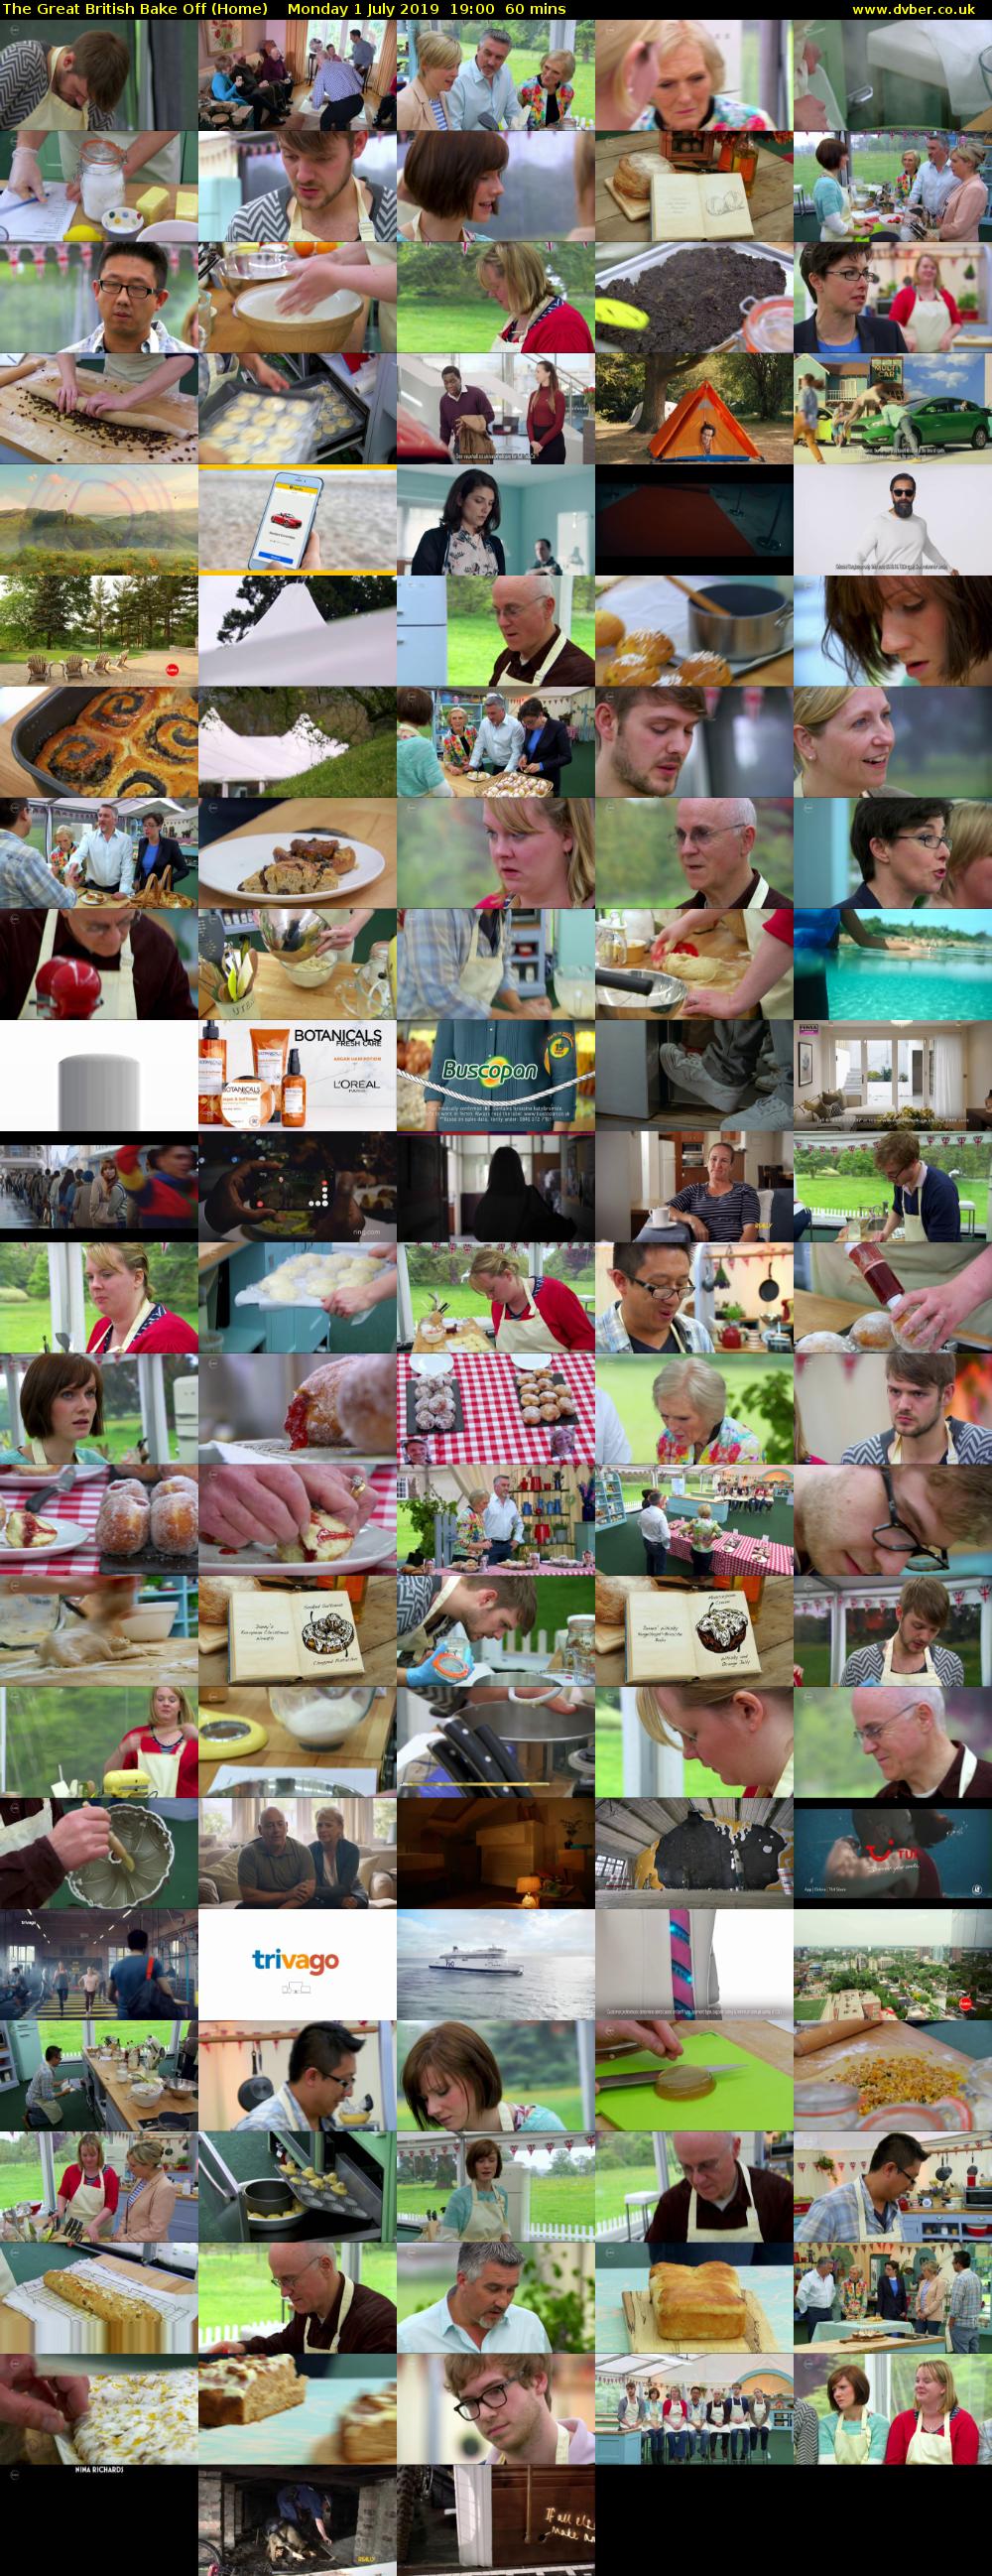 The Great British Bake Off (Home) Monday 1 July 2019 19:00 - 20:00